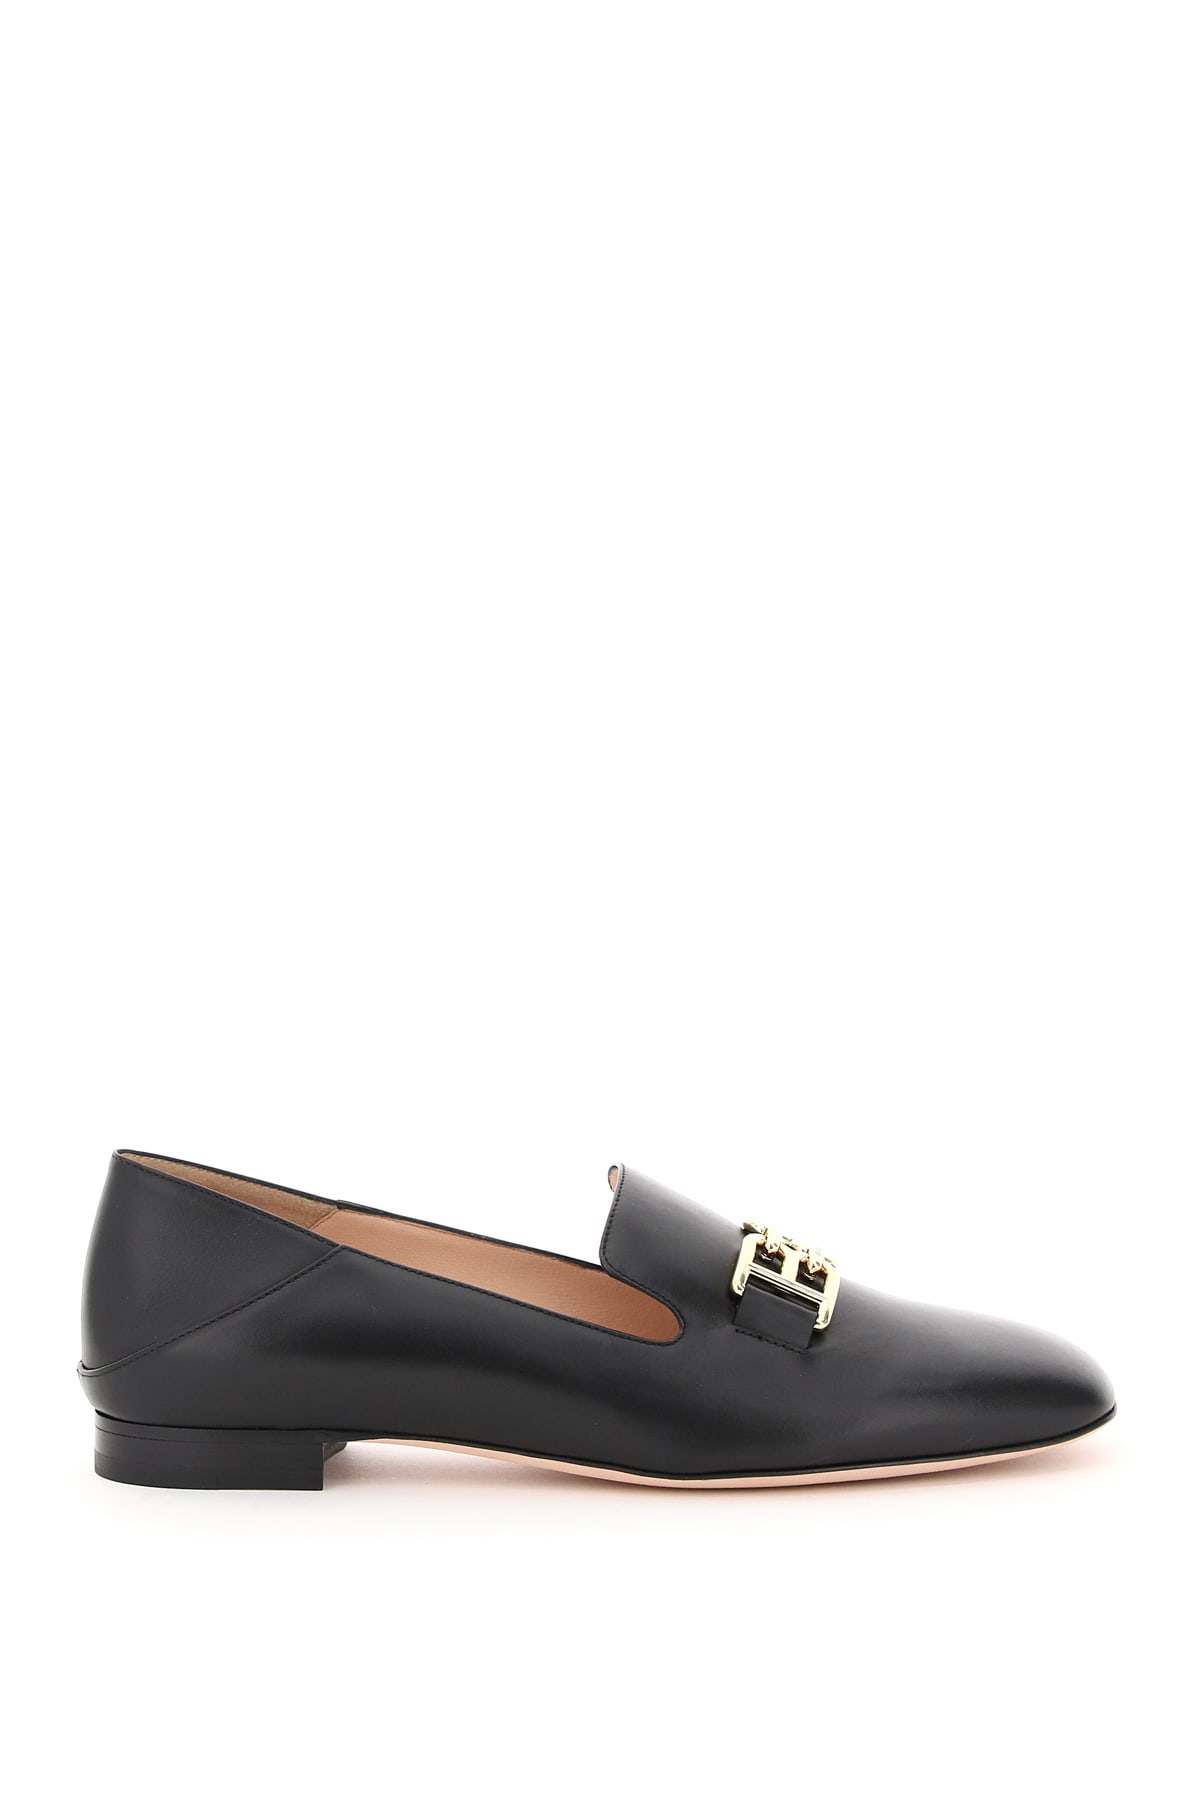 Bally Elely Loafer